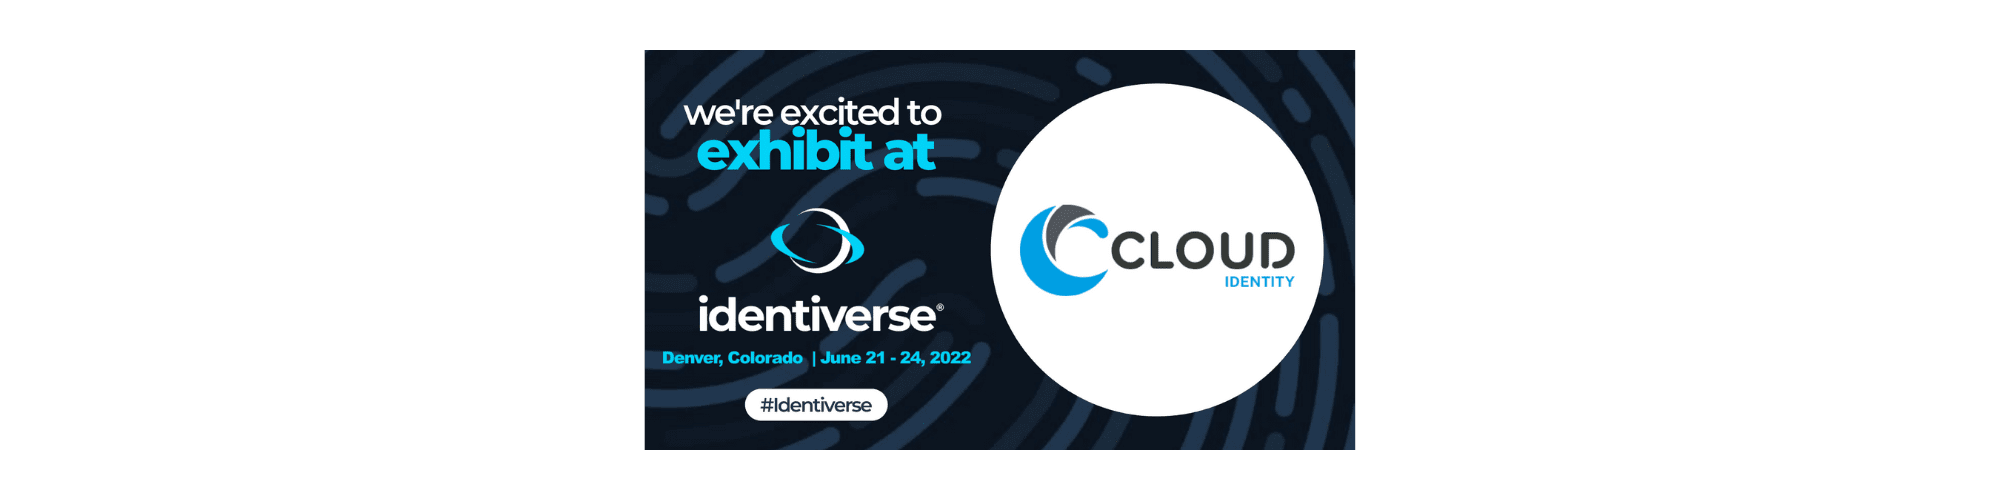 Cloud Identity is excited to exhibit at Identiverse 2022